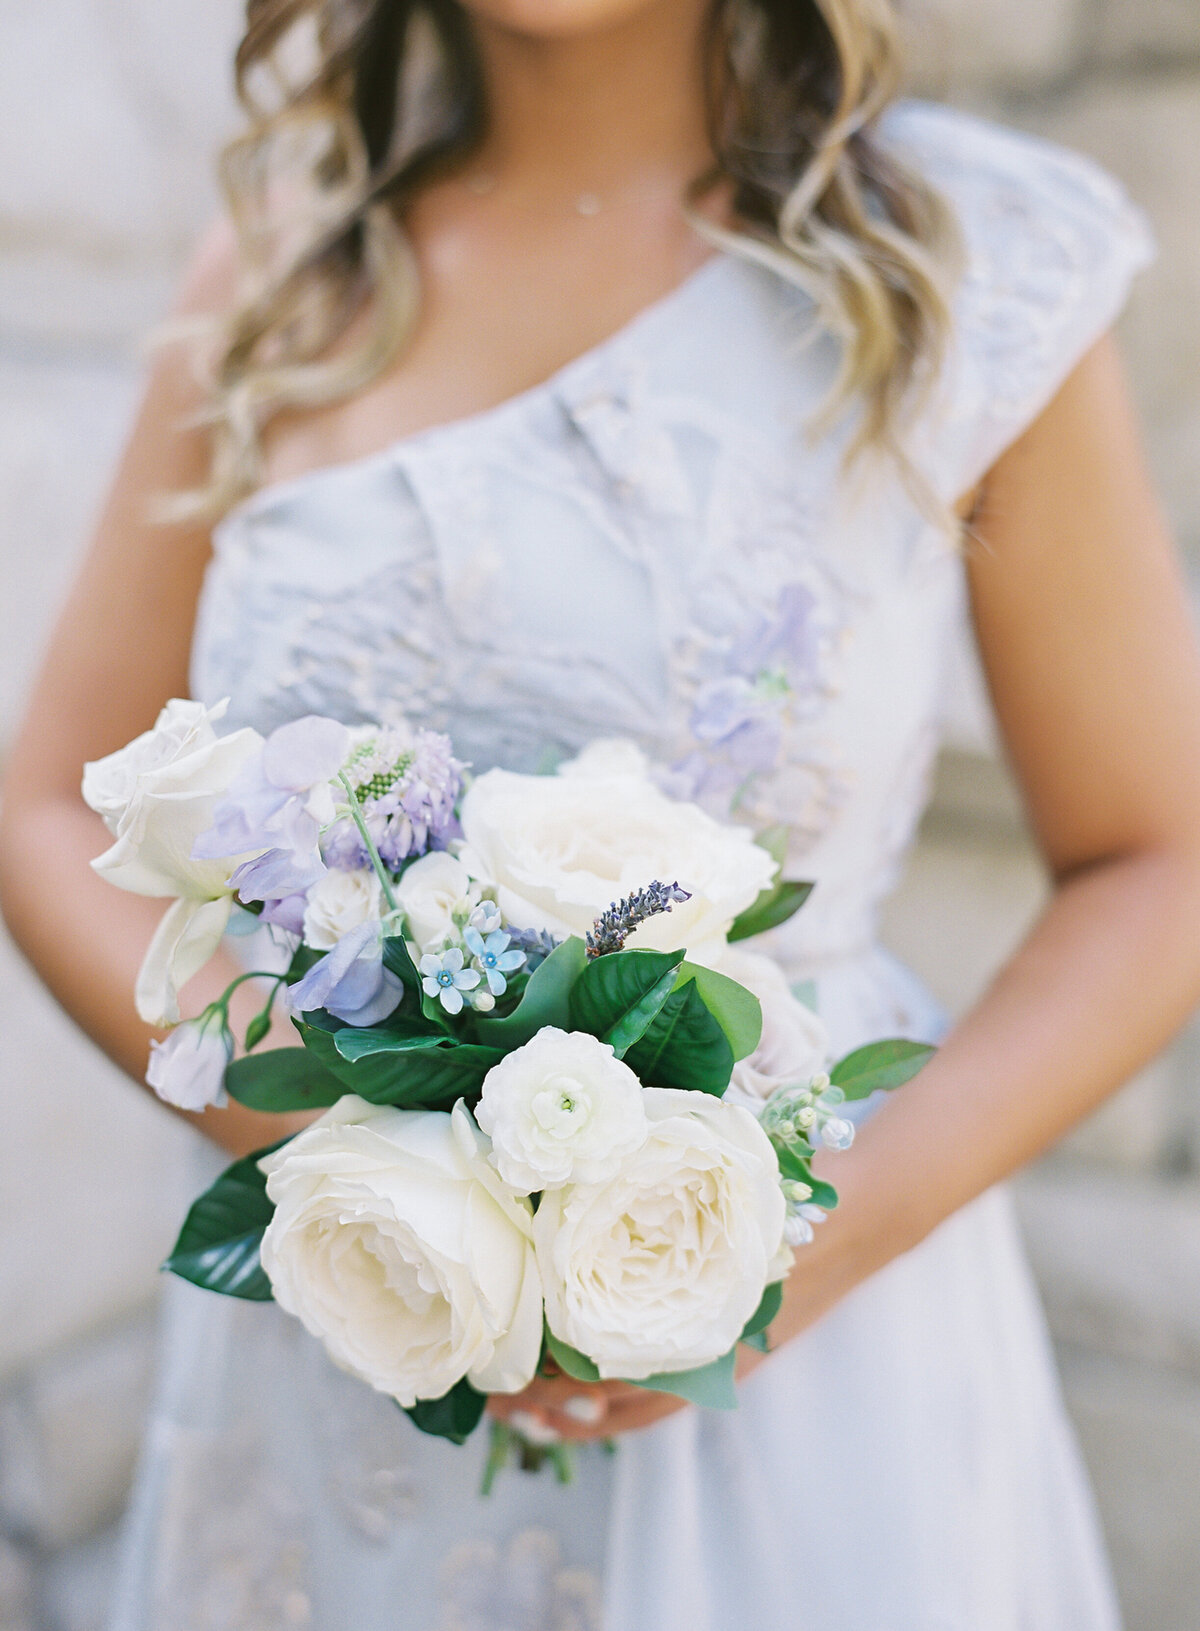 Kate Campbell Floral cream blue and lavender bridal bouquet sweet pea garden roses tweedia bridesmaid